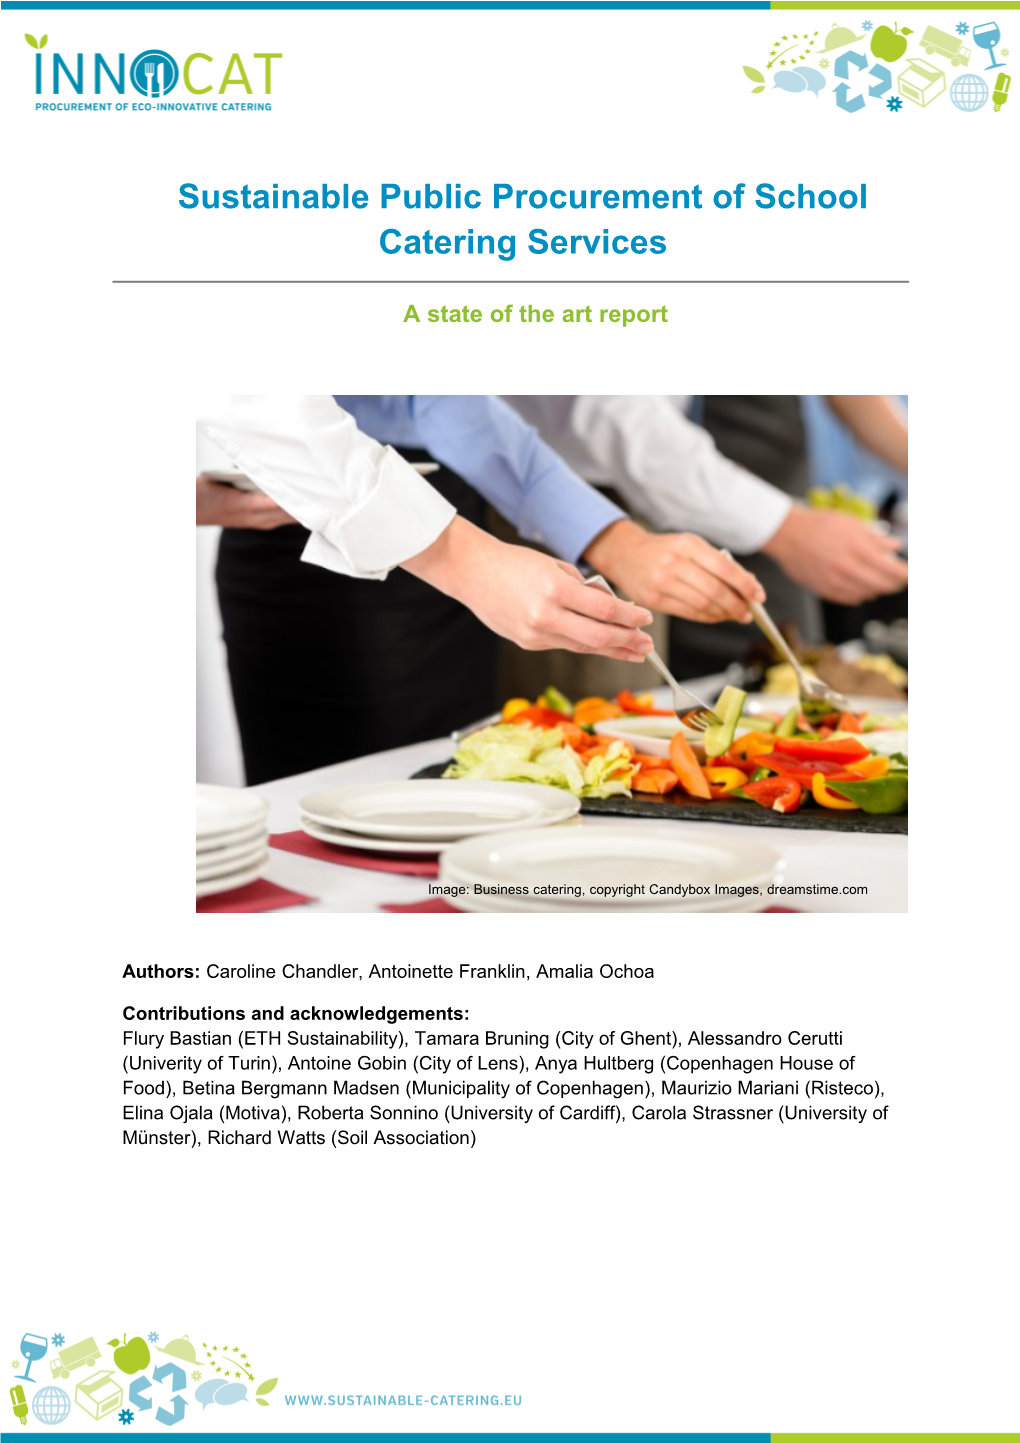 Sustainable Public Procurement of School Catering Services